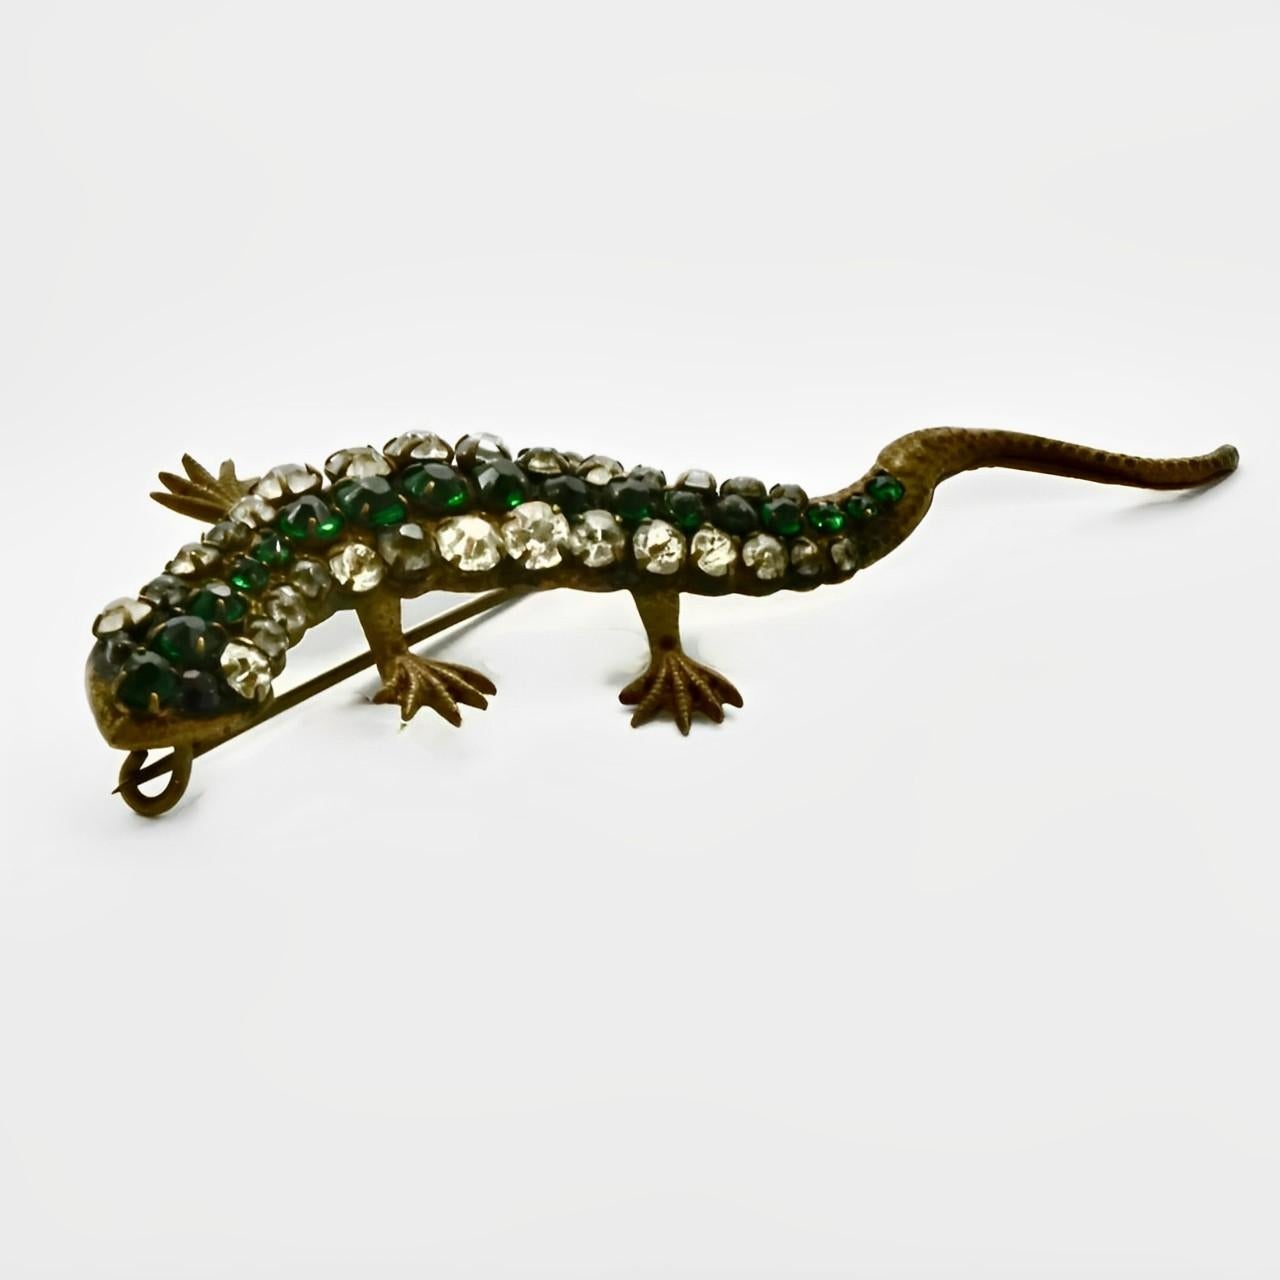 Wonderful Art Deco lizard brooch with green and clear paste stones, and red paste stone eyes. One eye has a replacement stone. The lizard was originally gold plated, it has mostly worn away to show the bronze metal underneath. Measuring length 8.2